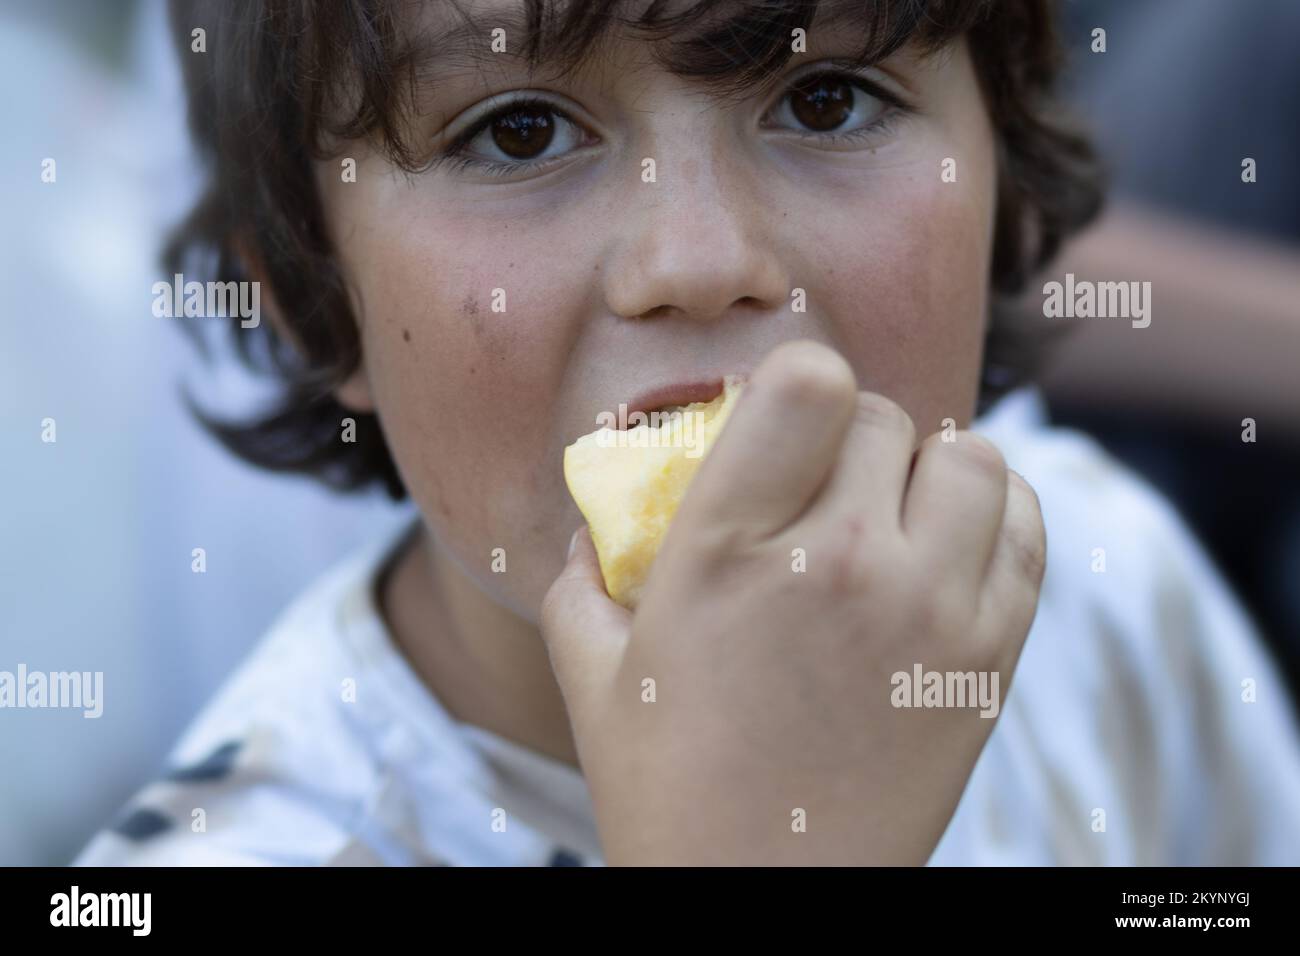 Brown-eyed cute boy eating an apple Stock Photo